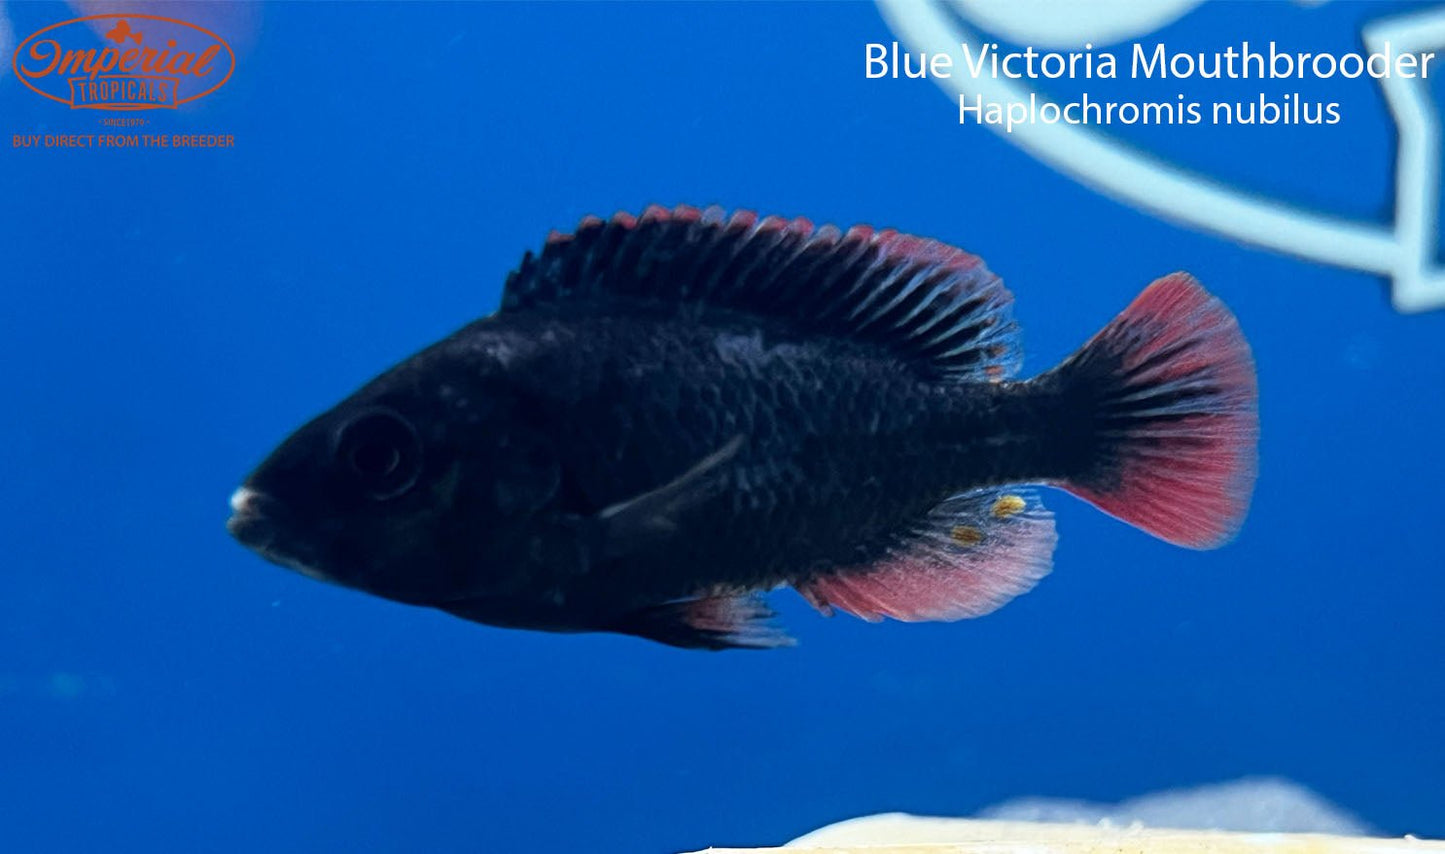 Blue Victoria Mouthbrooder